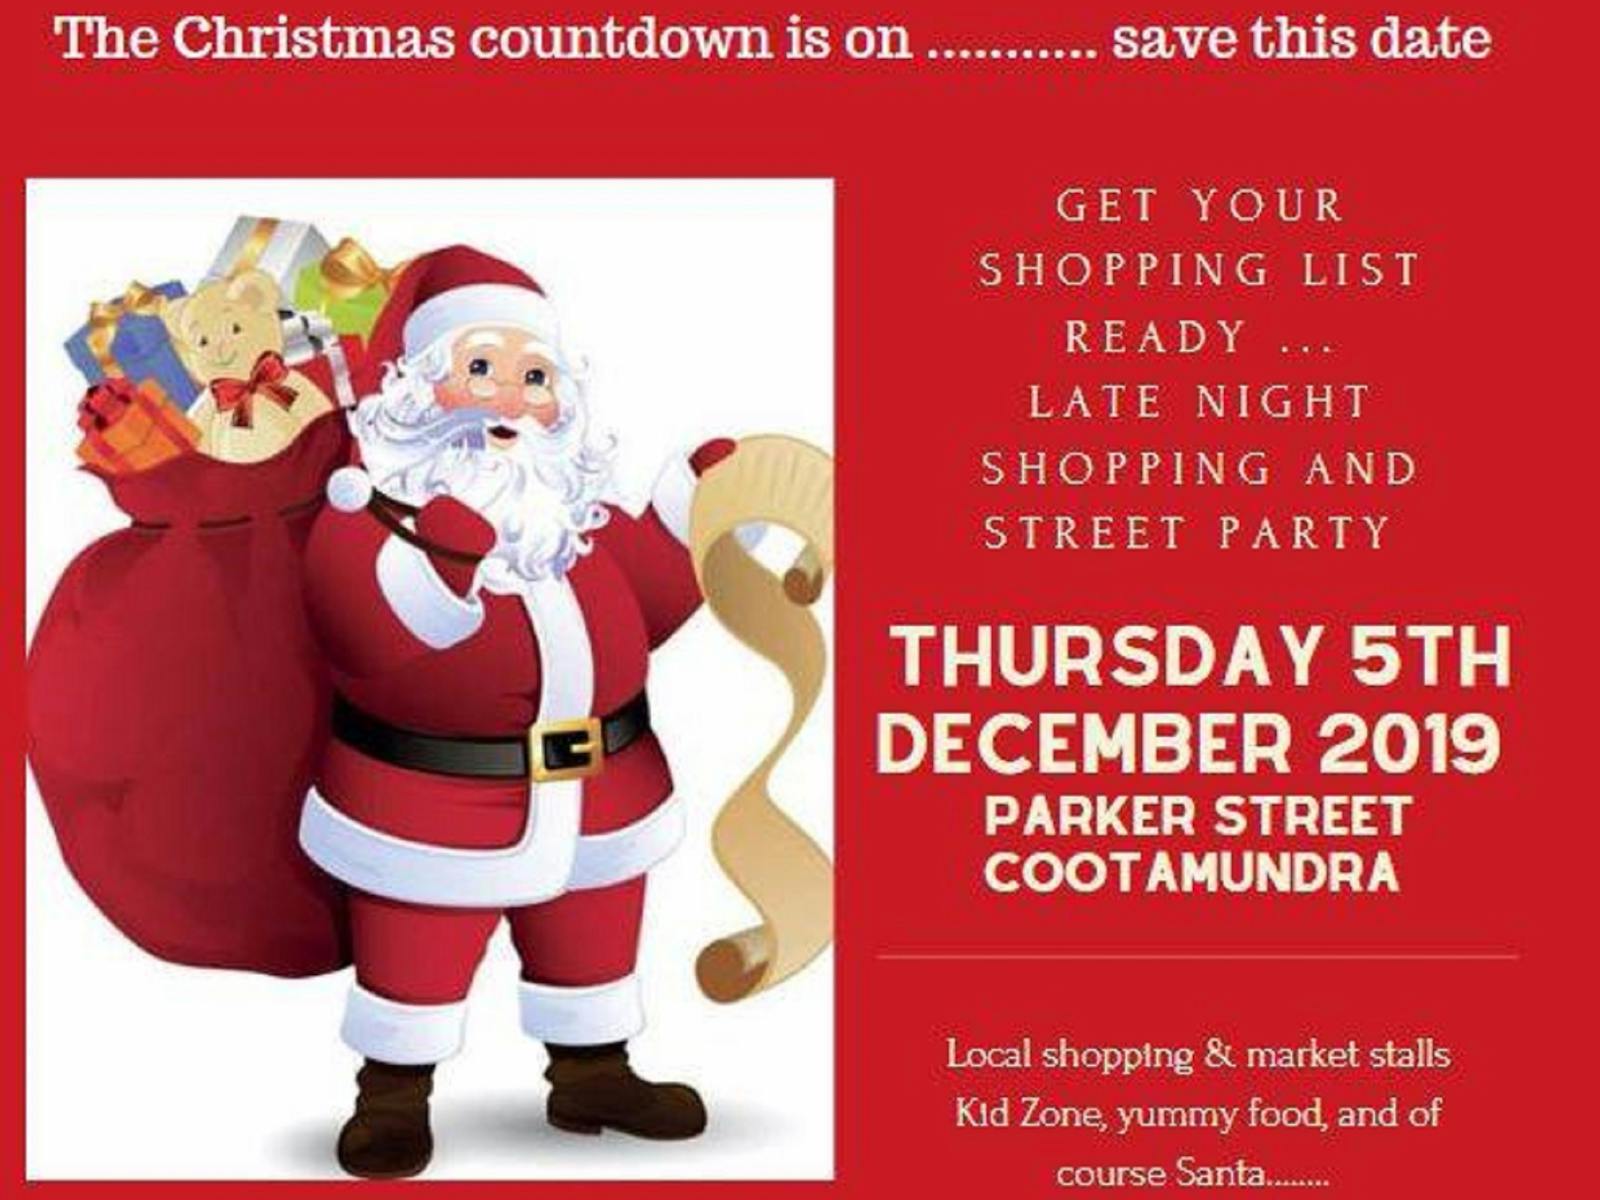 Image for Cootamundra Christmas Party